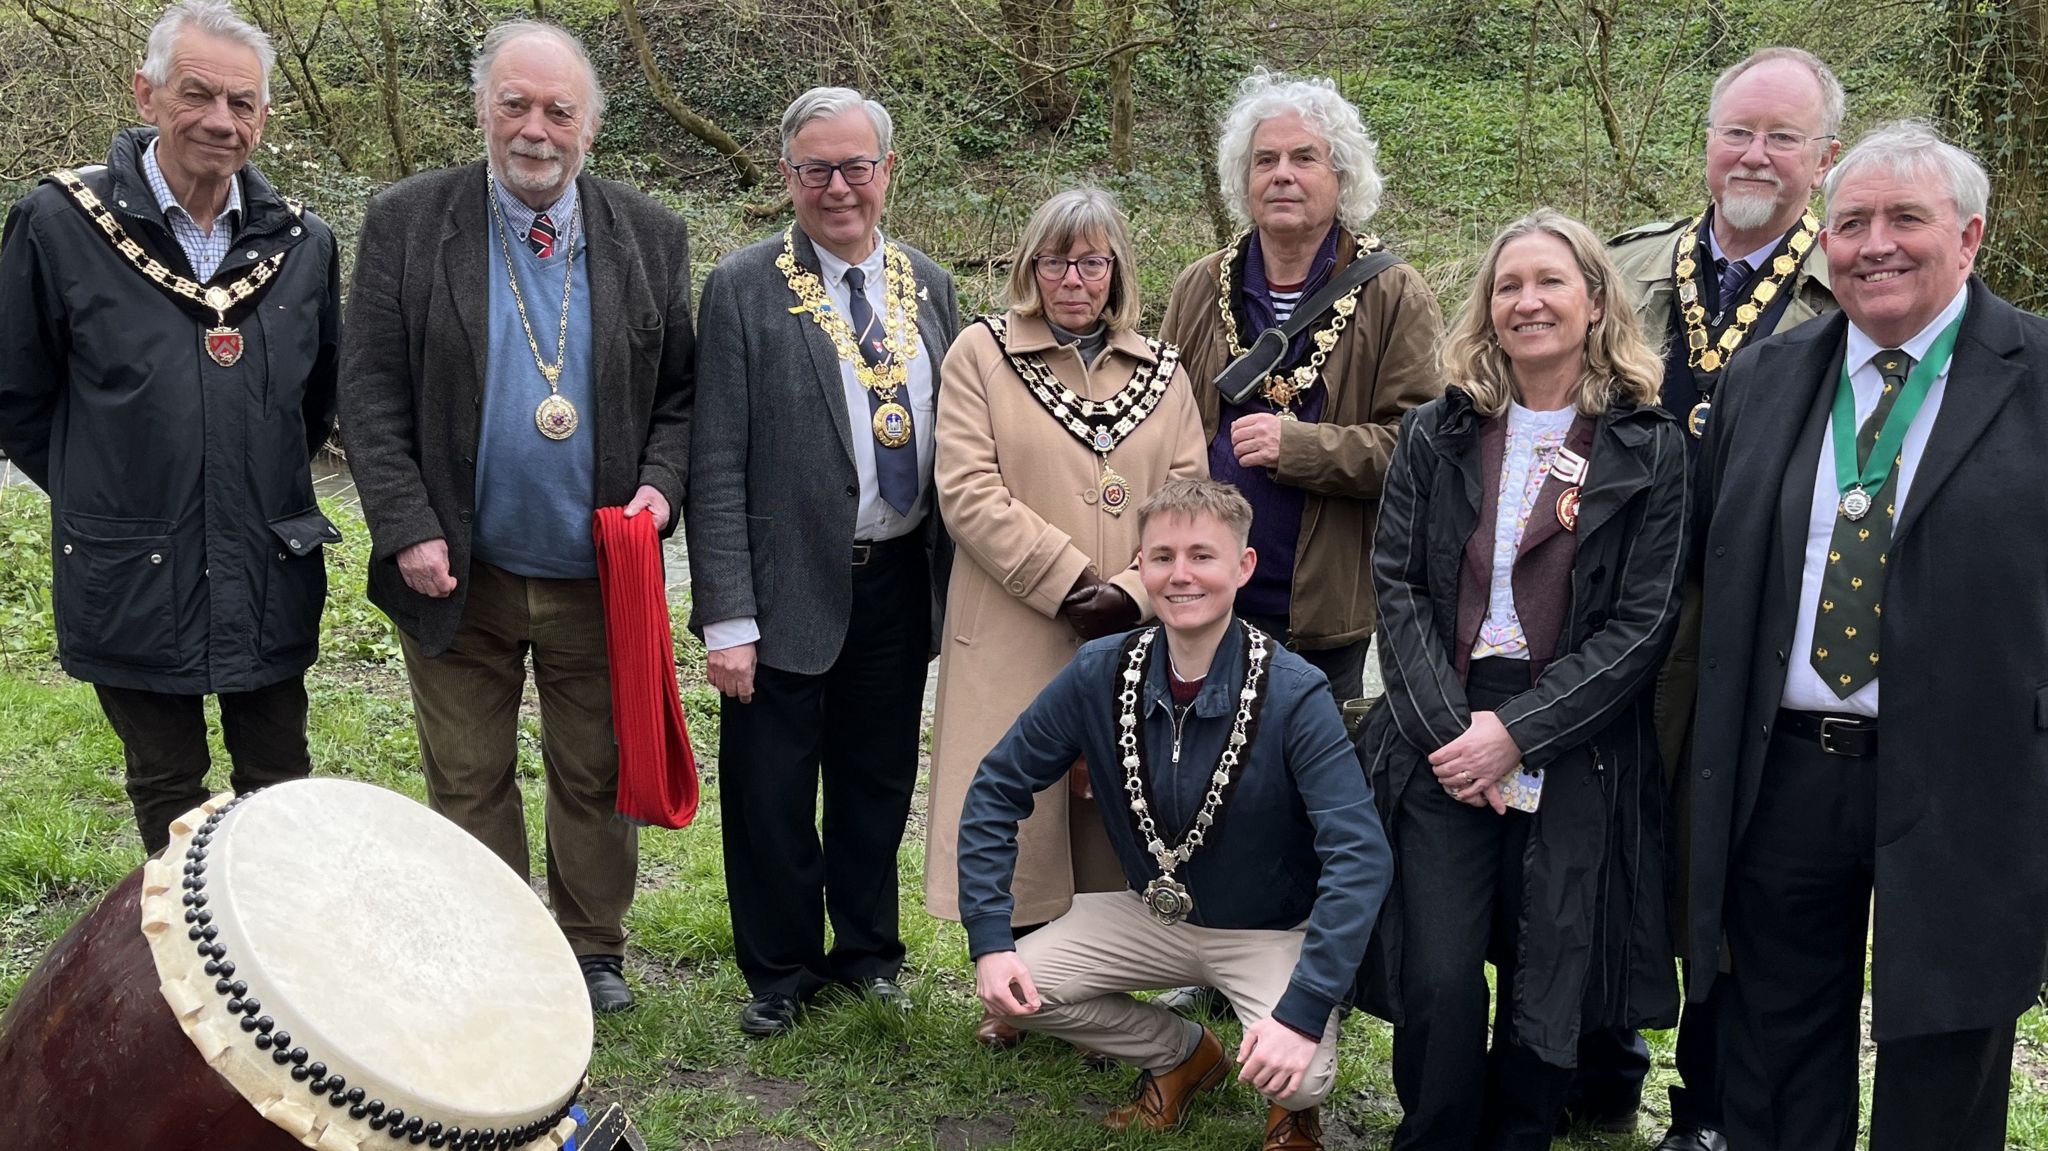 Mayors from Malmesbury, Marlborough, Highworth, Chippenham, Calne and Royal Wootton Bassett were joined by the Deputy Lord Lieutenant of Wiltshire and the vice Chairman of Wiltshire Council standing behind a Japanese drum